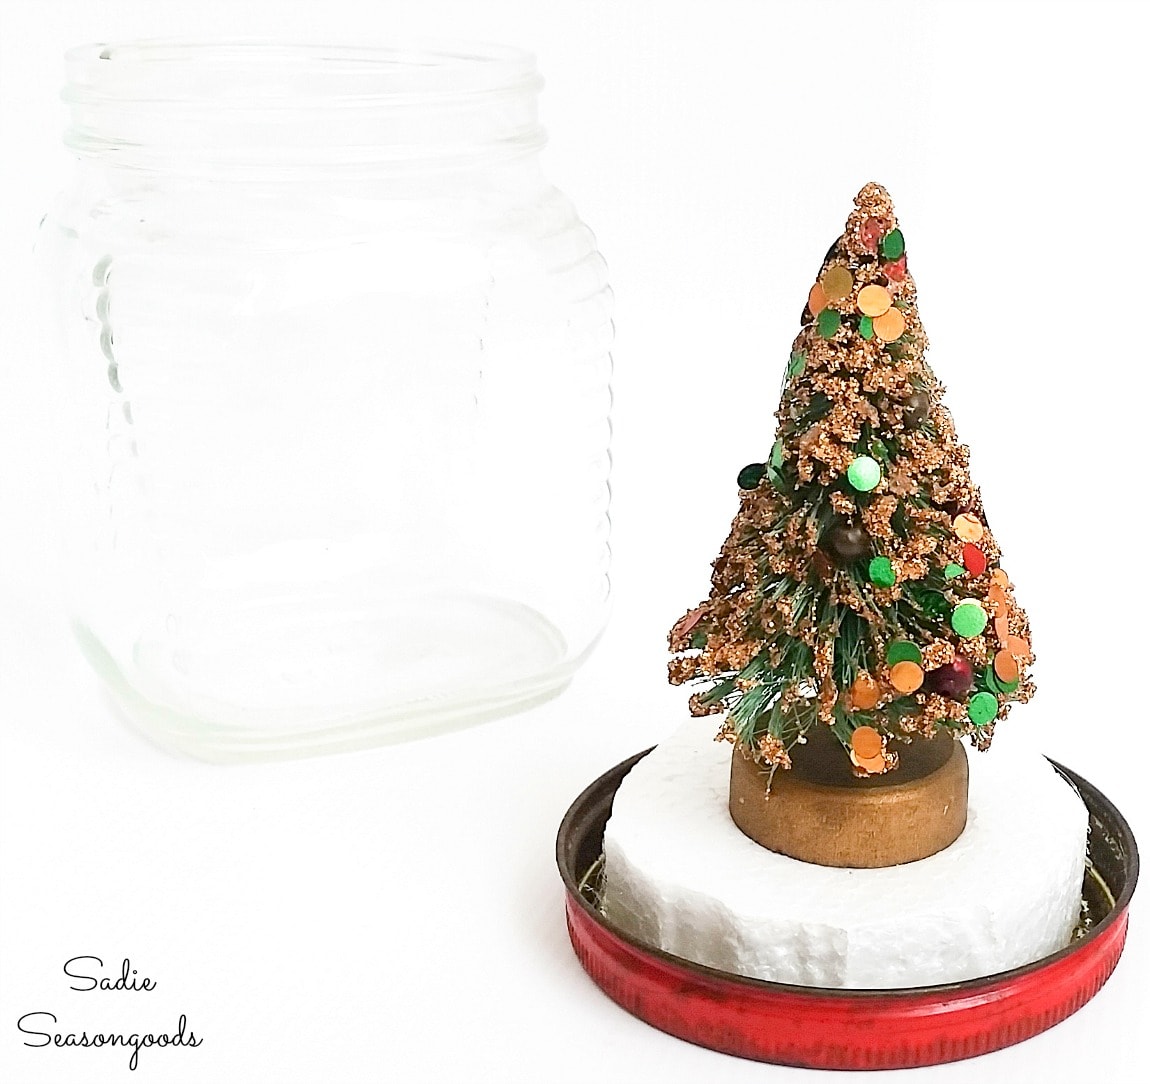 Making a waterless snow globe with a vintage bottle brush tree